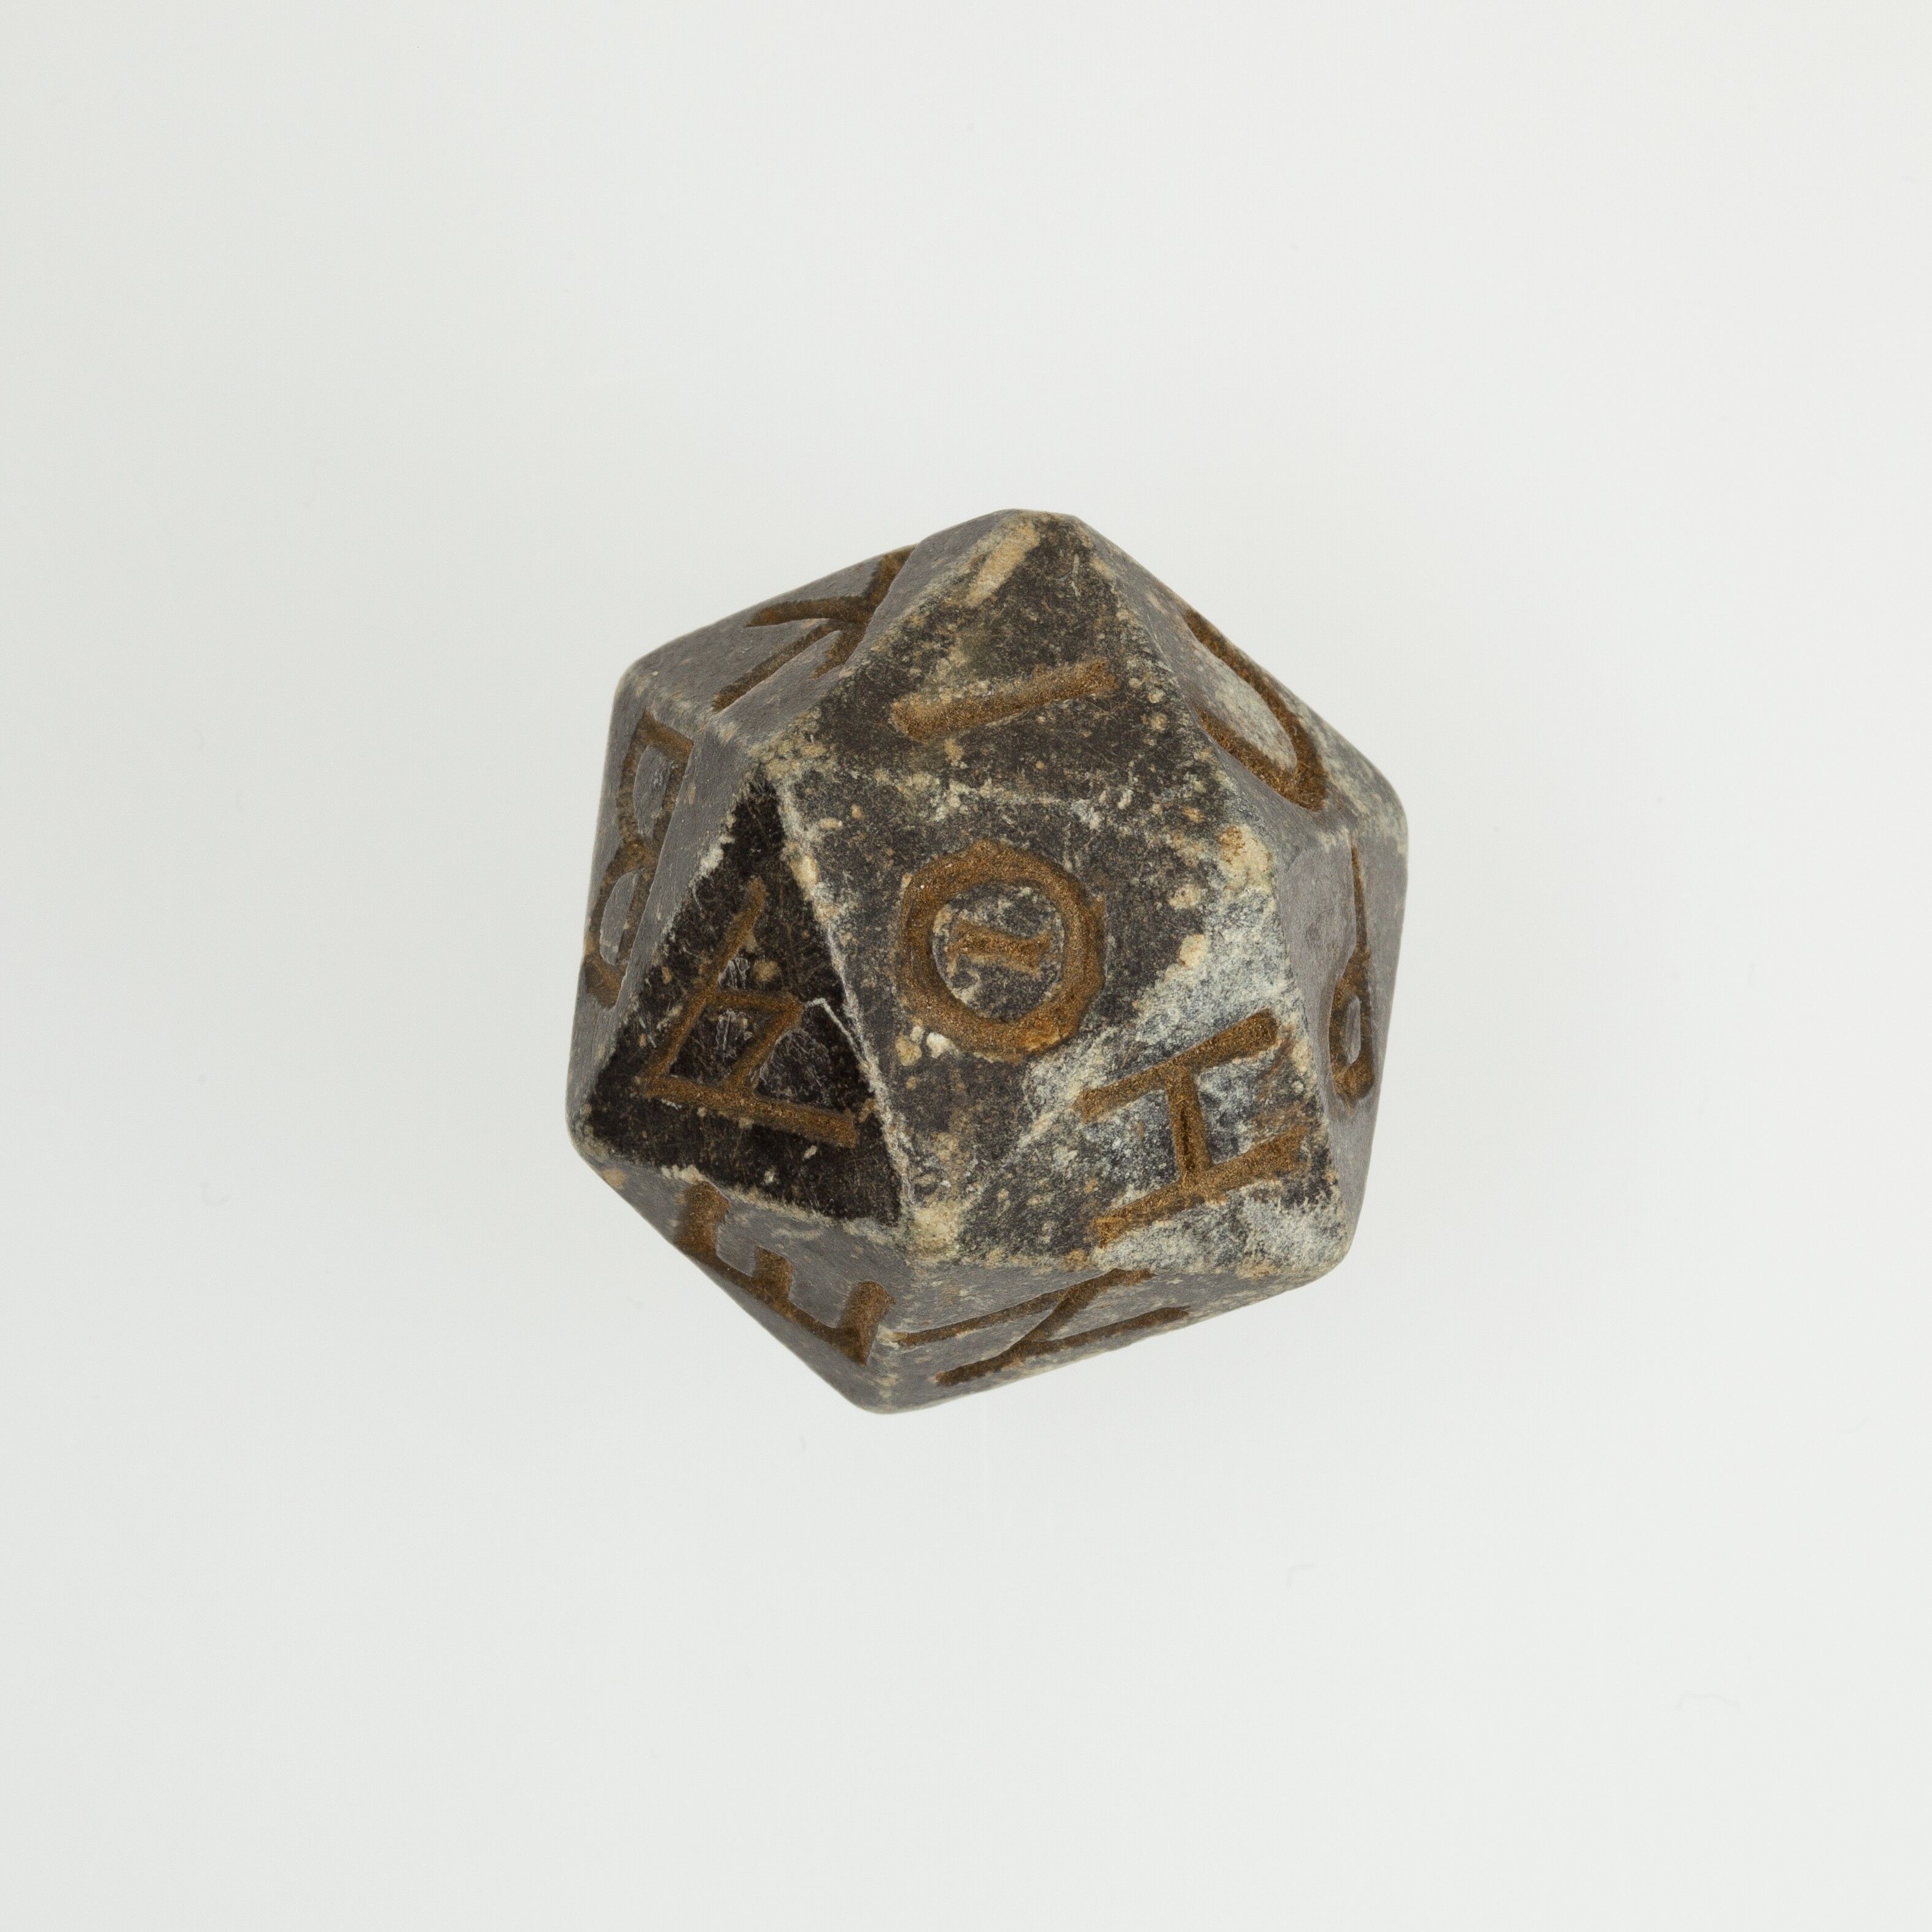 Polyhedral DND Dice Sets, 7-Die Solid Metallic Polyhedral D&D Dice